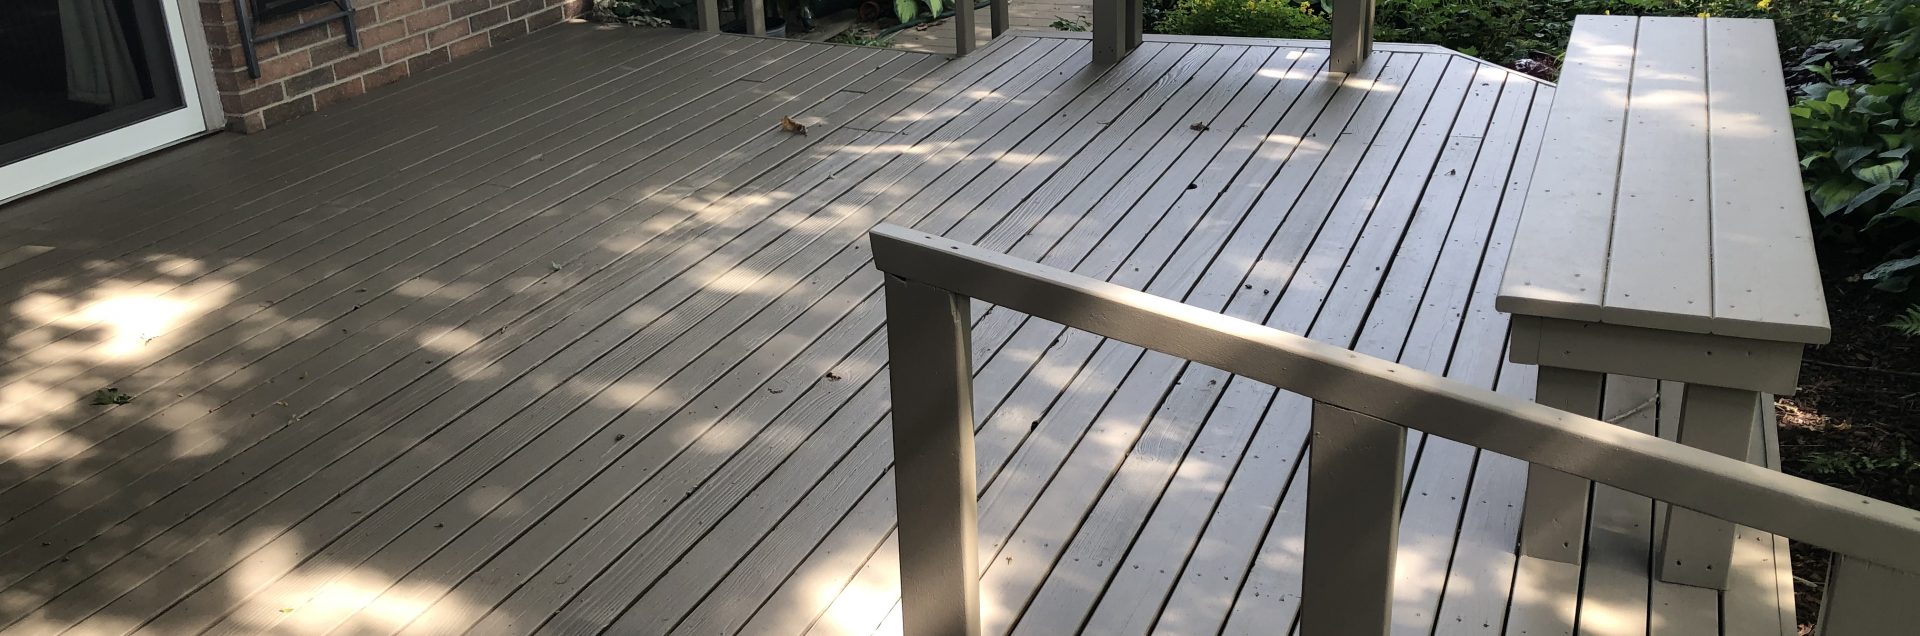 stained deck completed by certapro painters of oswego